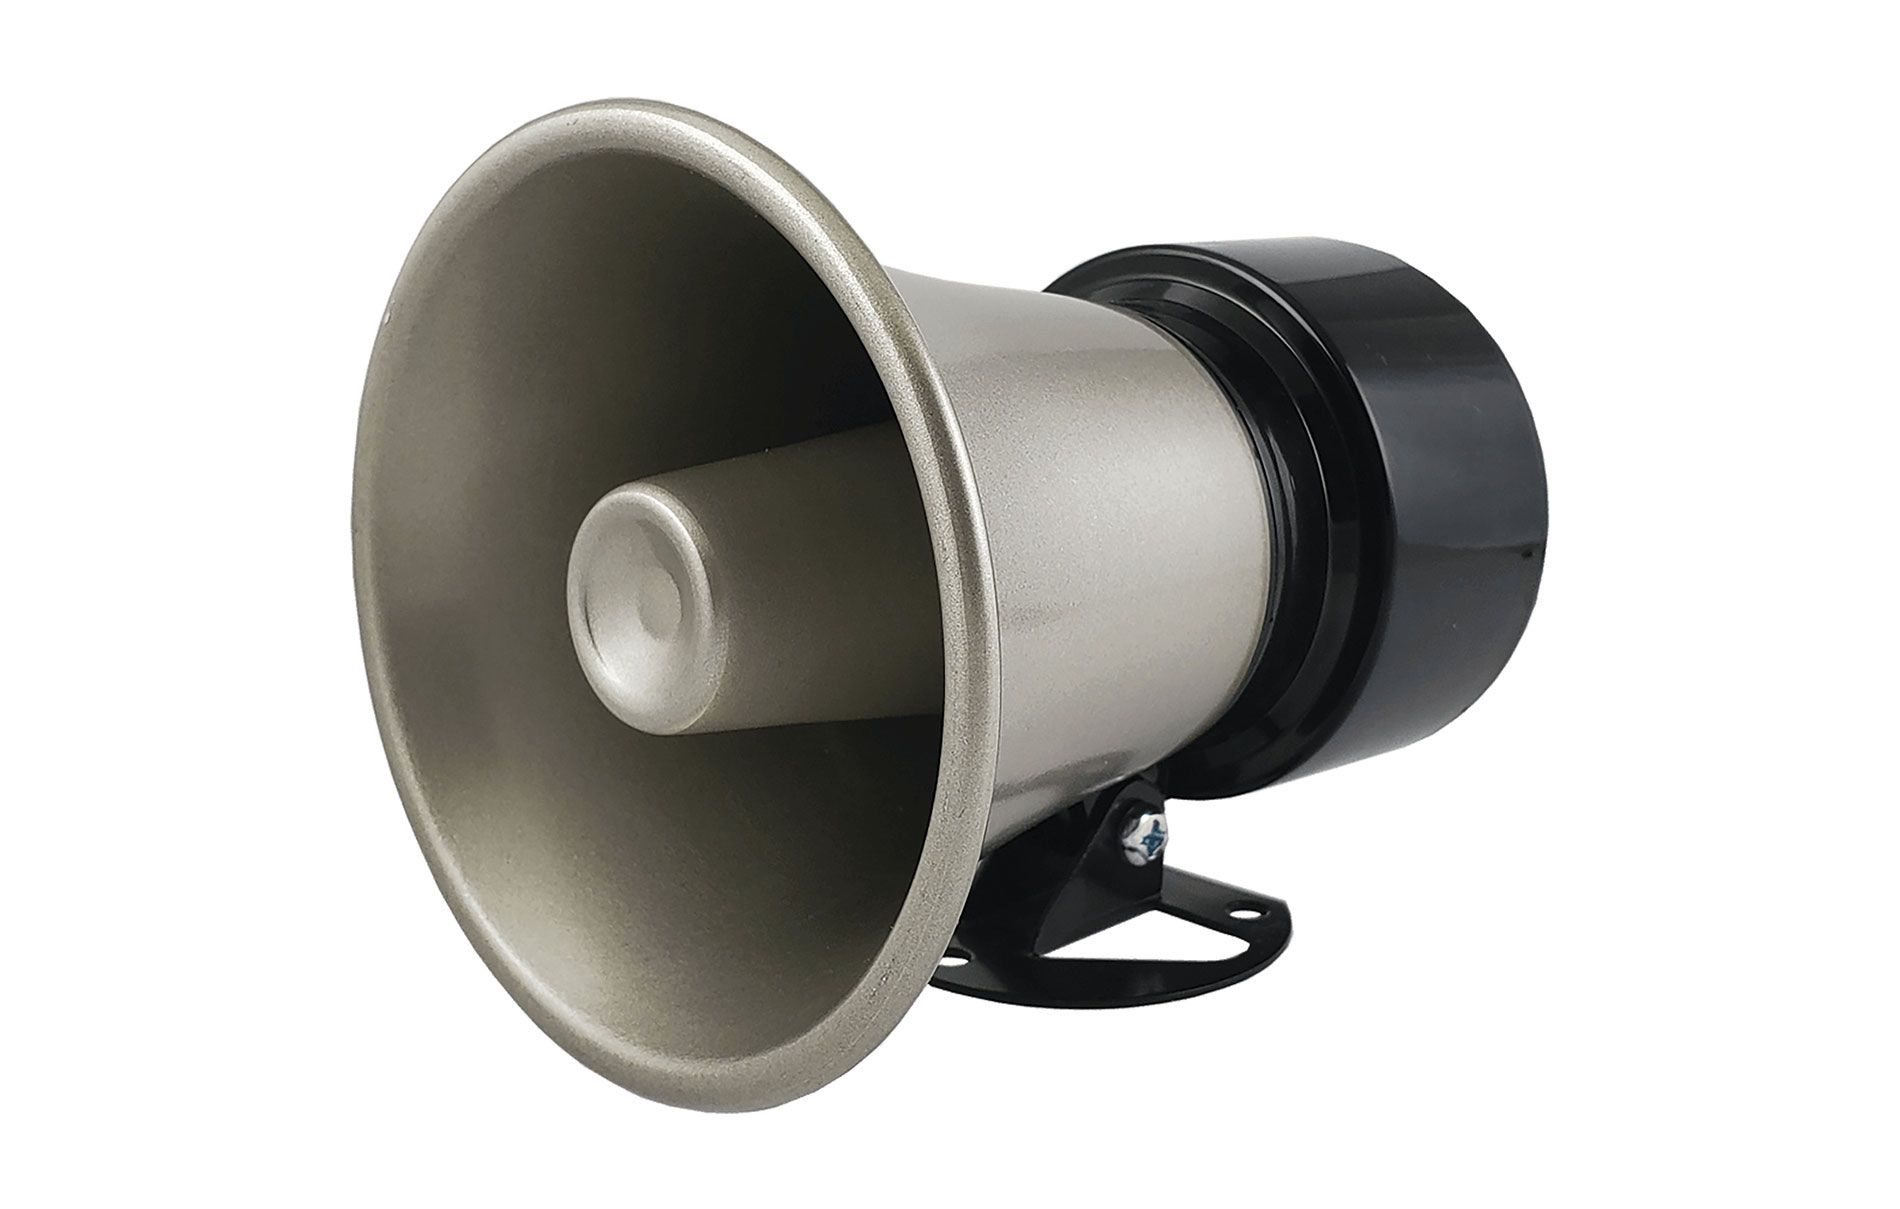 Black and gray paging horn. Image by Viking Electronics.